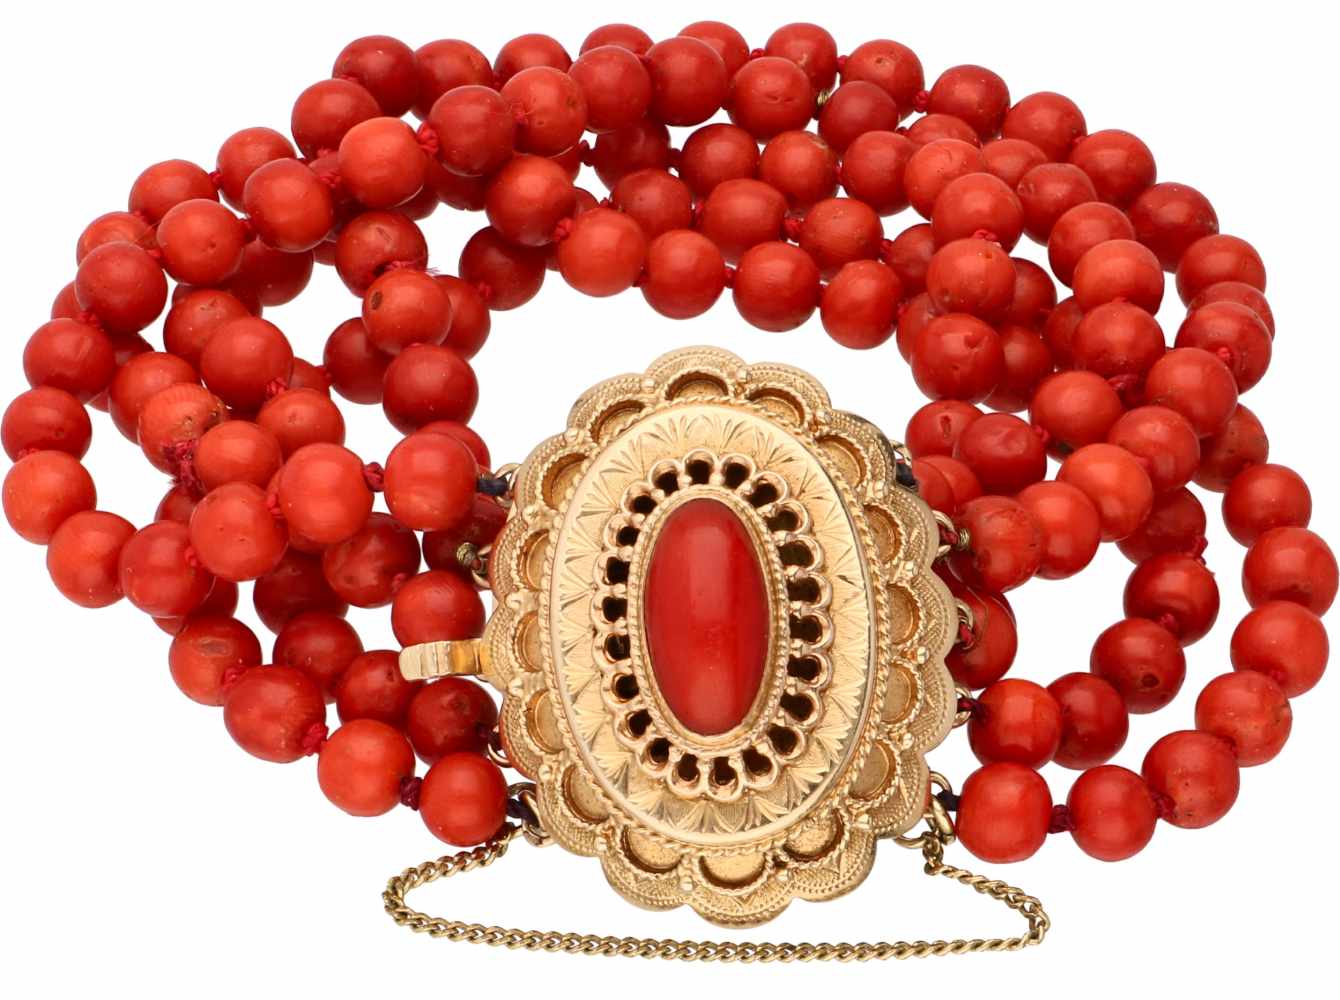 Bracelet with large yellow gold closure, red coral - 14 ct.